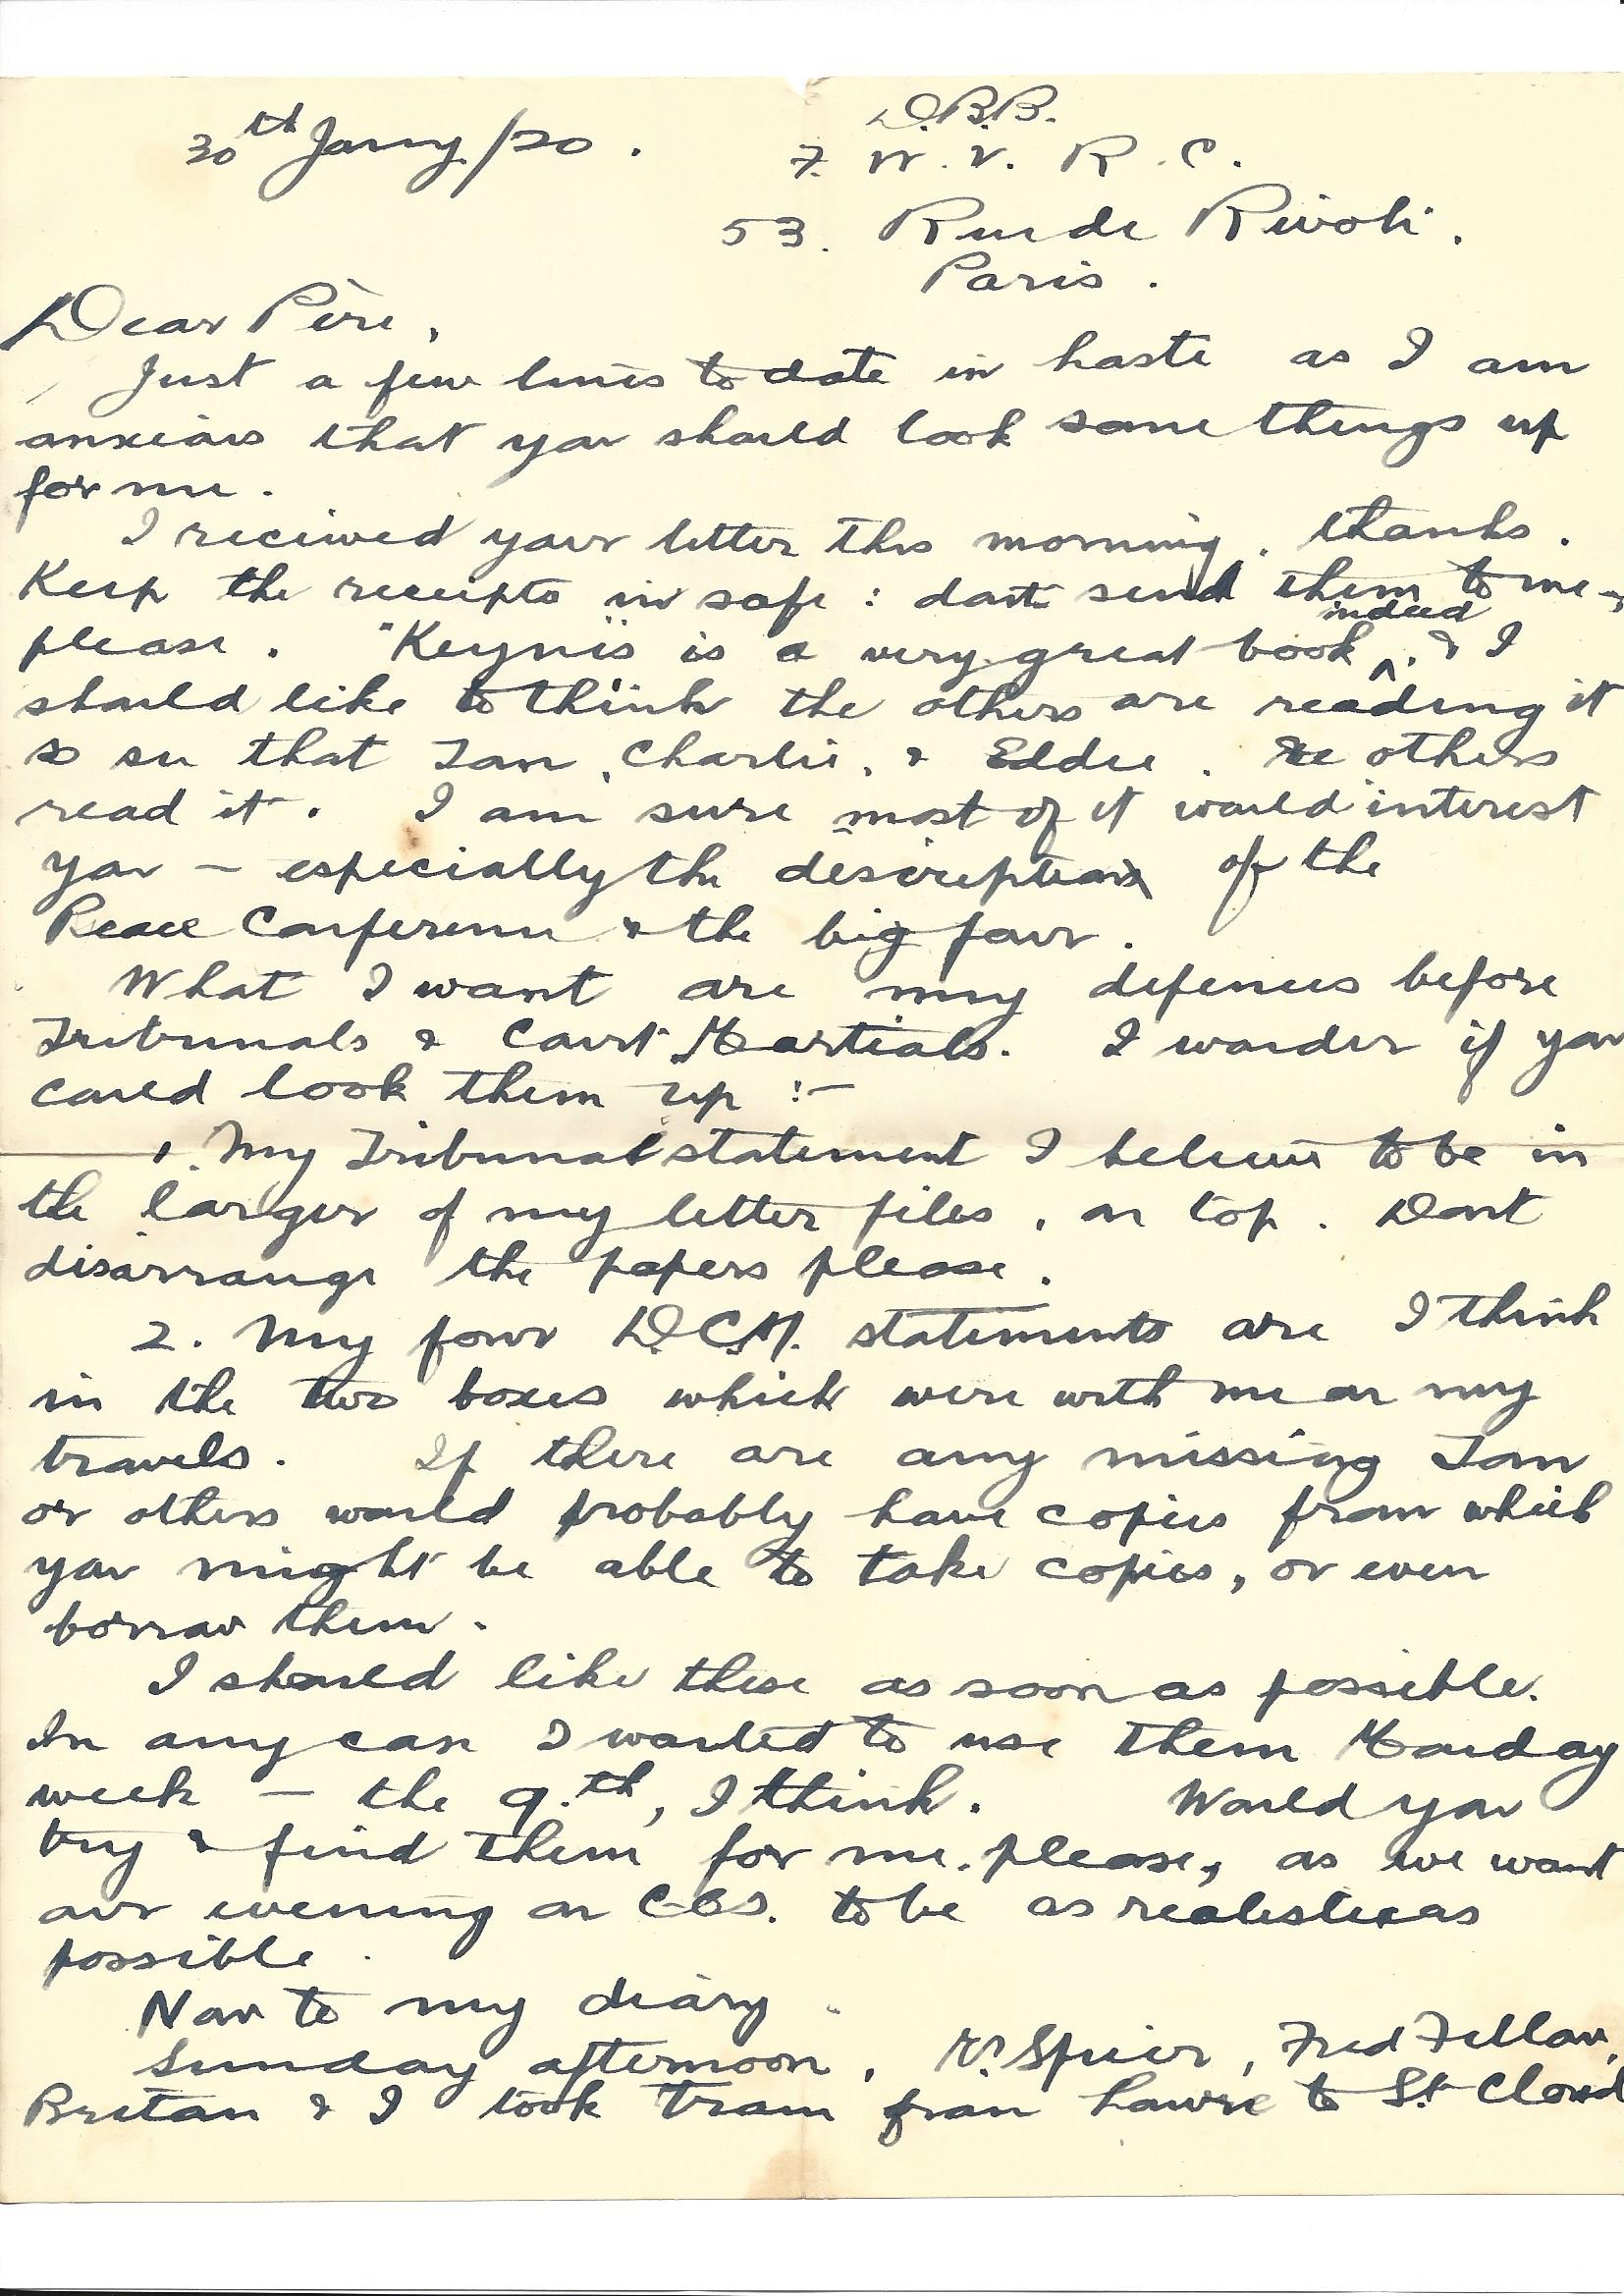 1920-01-30 page 2 letter by Donald Bearman